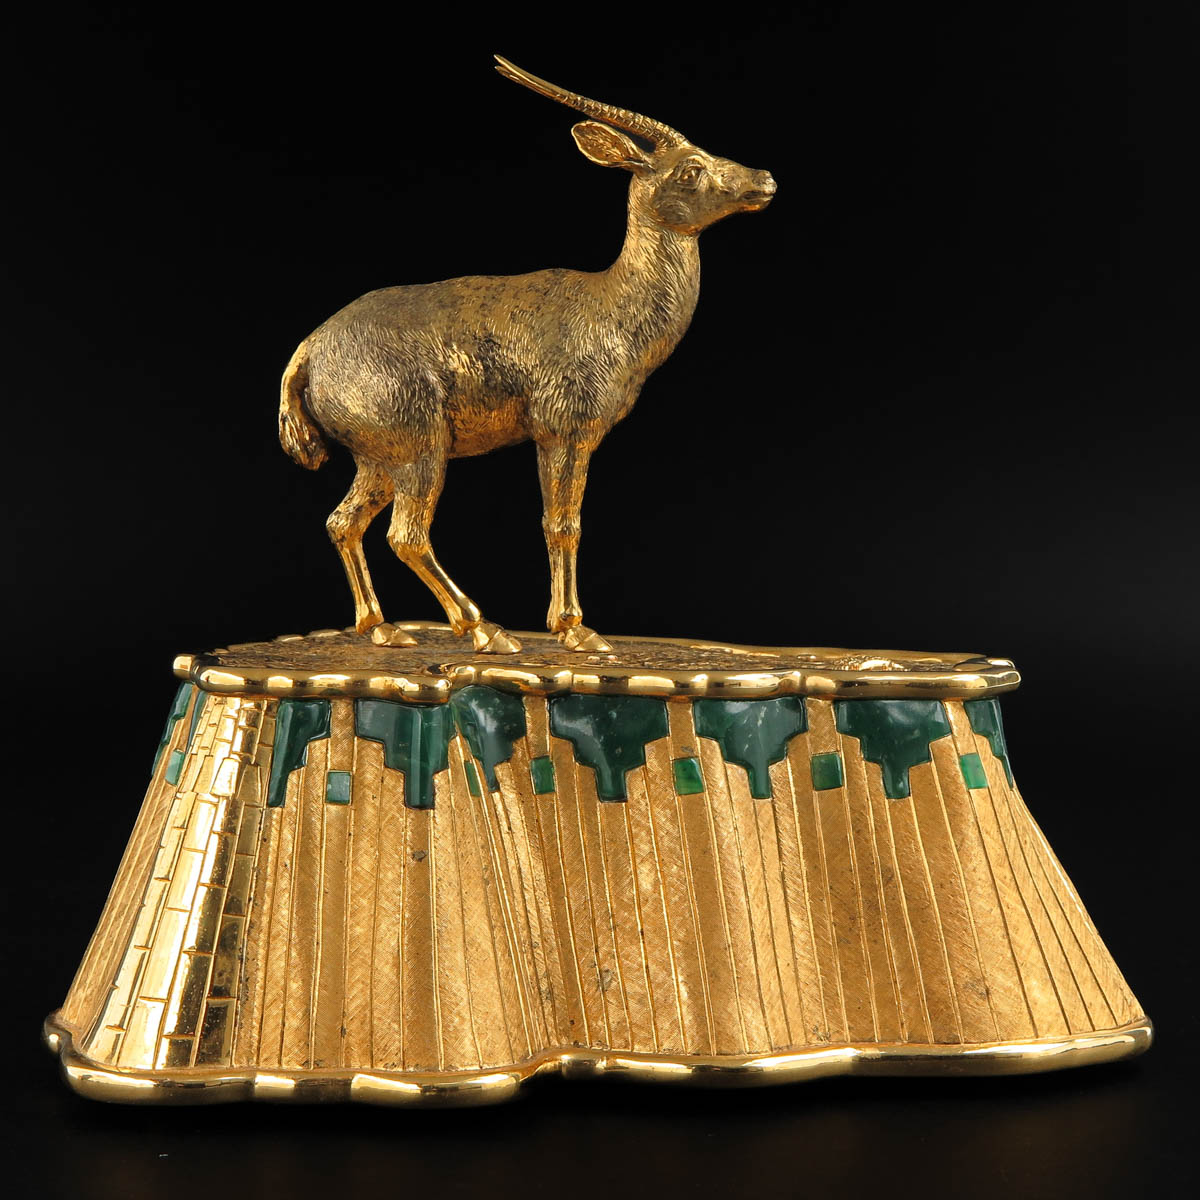 A Mouawad Jewelers Antelope Sculpture Set with Jewels - Image 3 of 10